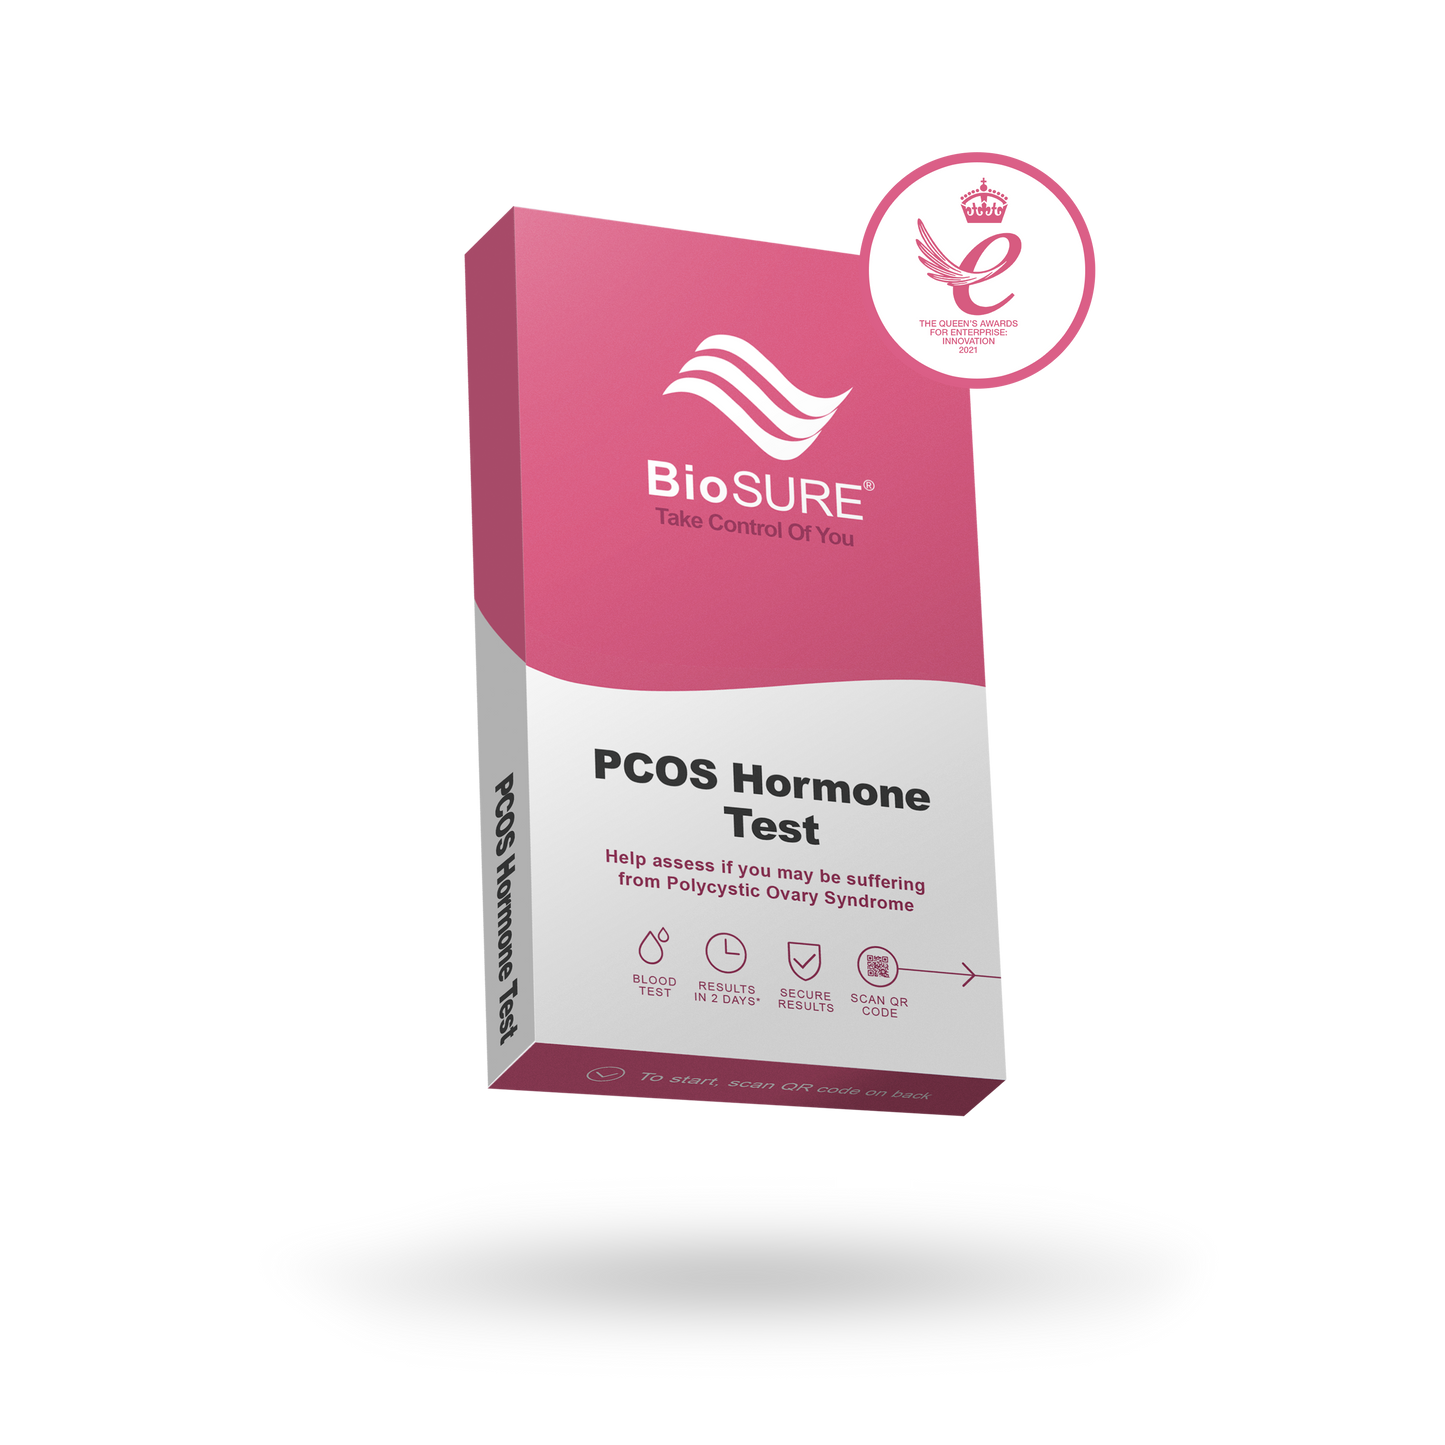 BioSURE Polycystic Ovary Syndrome (PCOS) Test